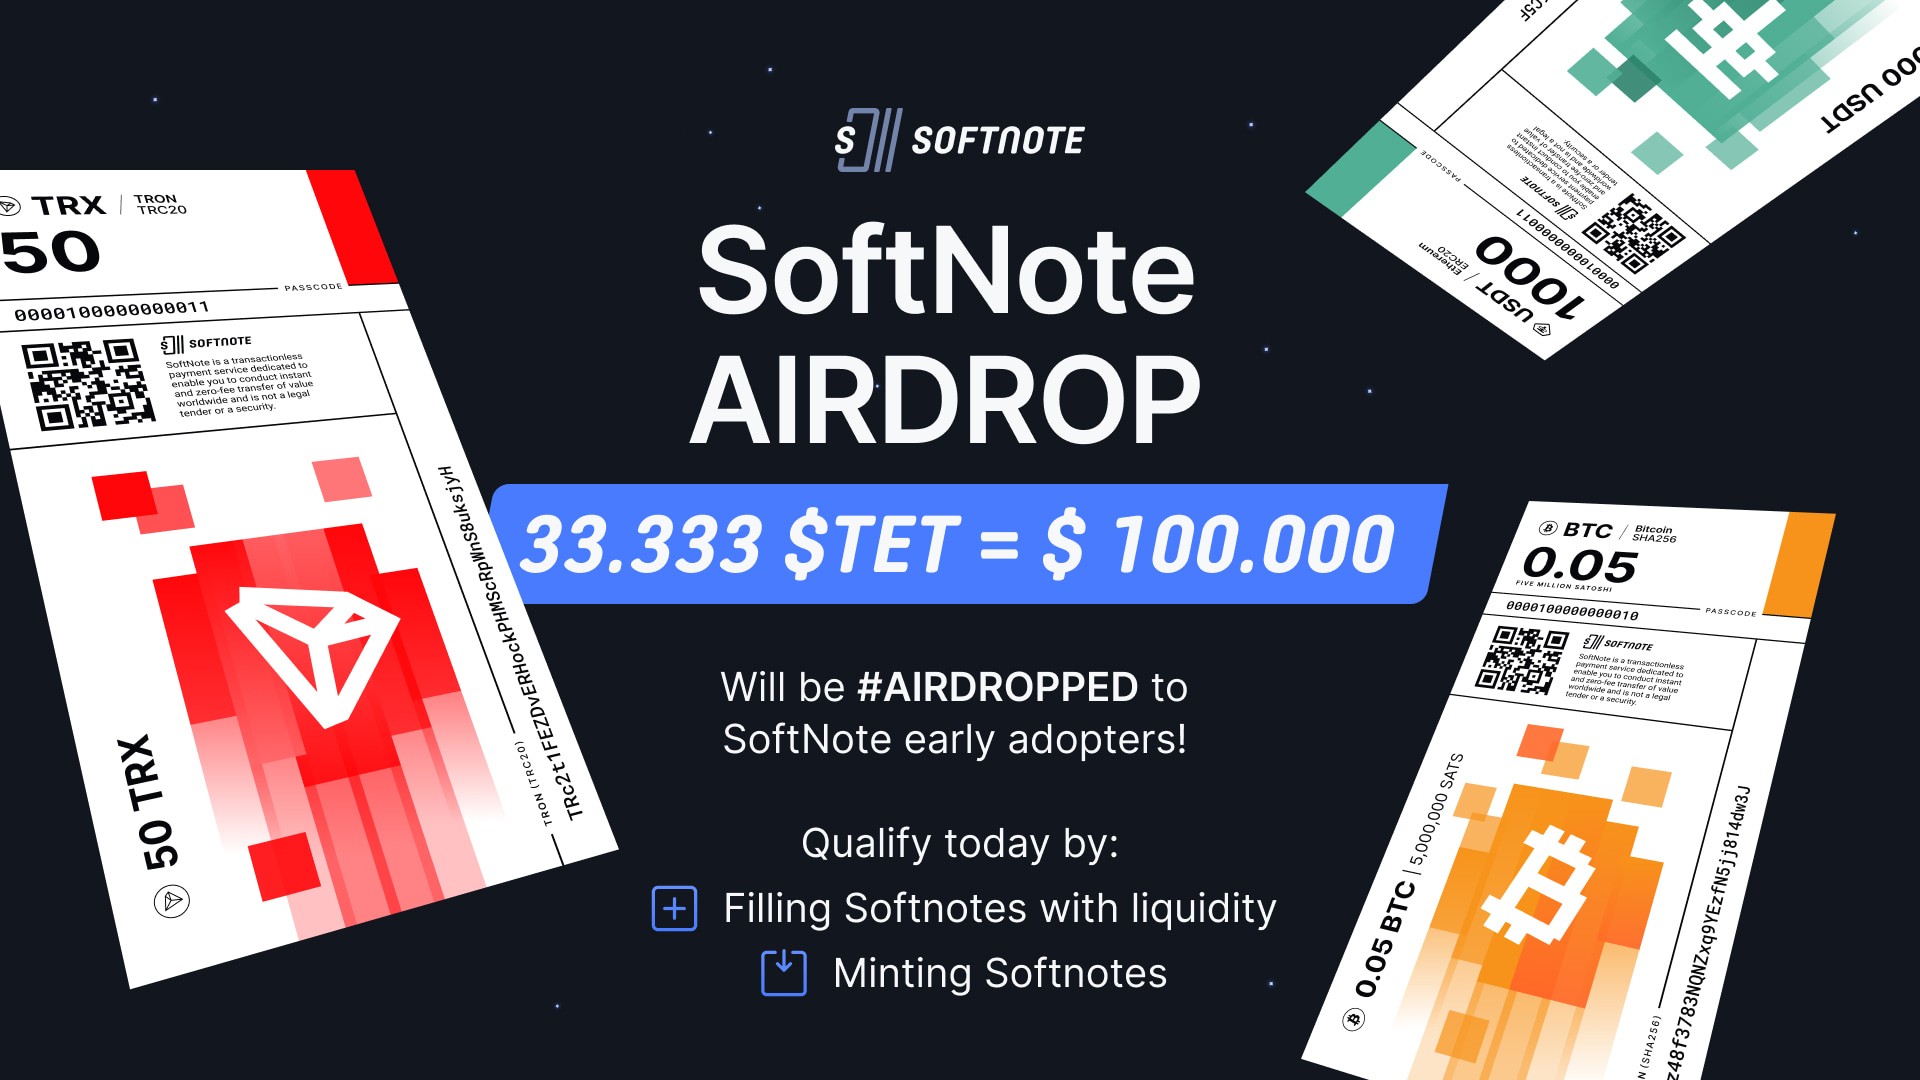 Announcing the Tectum SoftNote Airdrop